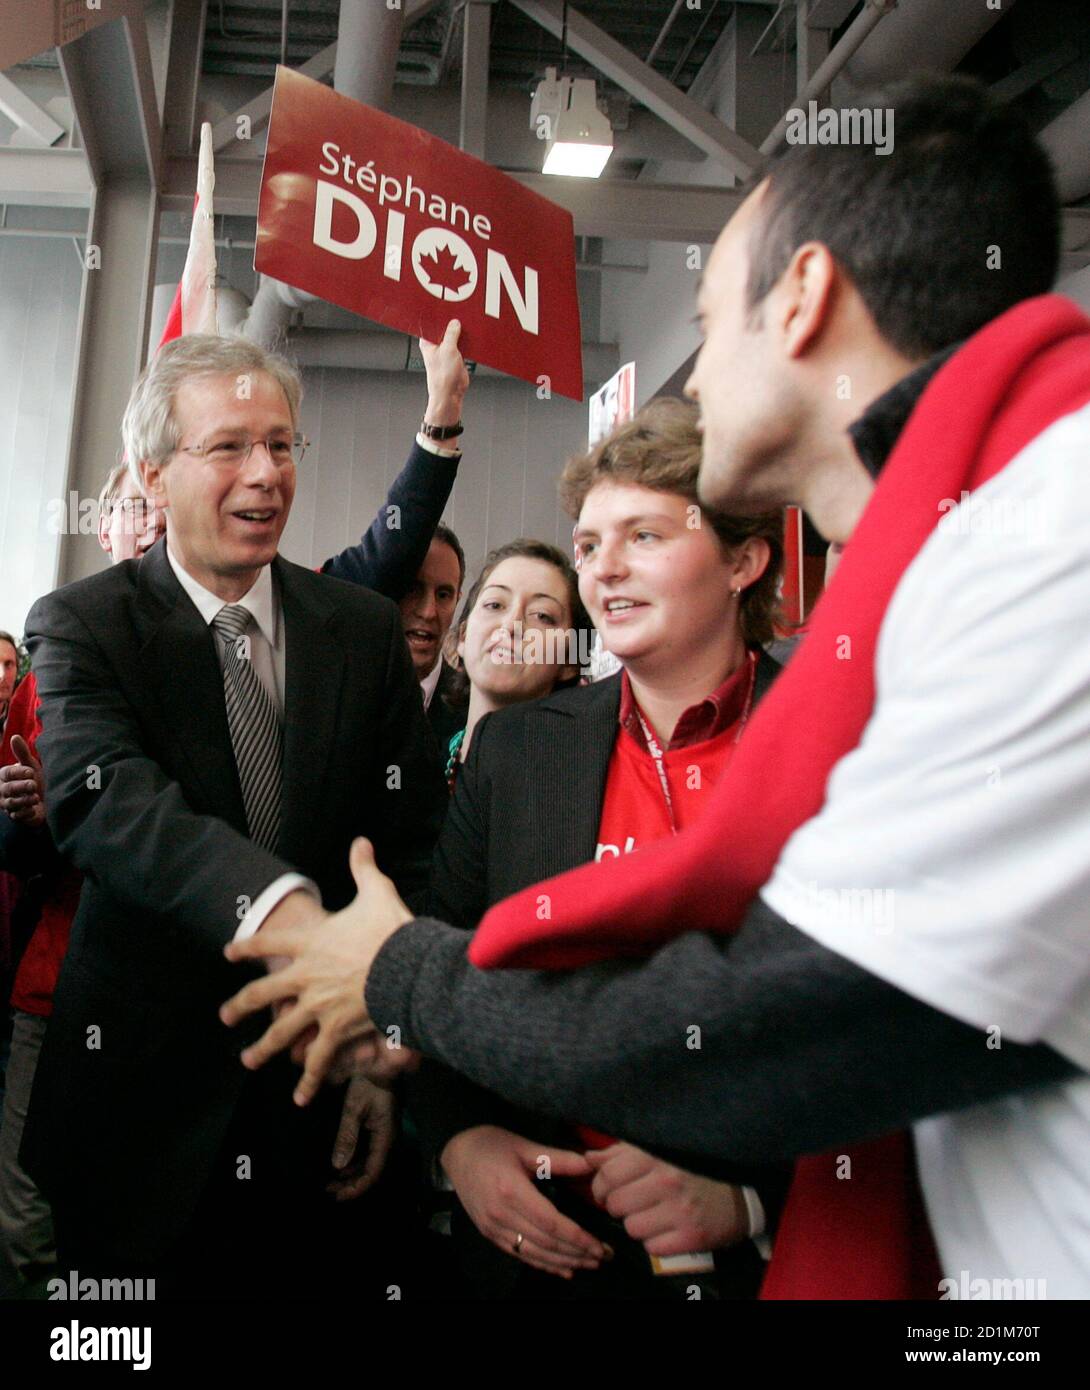 Liberal leadership candidate Stephane Dion greets supporters at the party convention in Montreal, November 30, 2006. The Liberals will elect a new leader later in the week.        REUTERS/Chris Wattie    (CANADA) Stock Photo